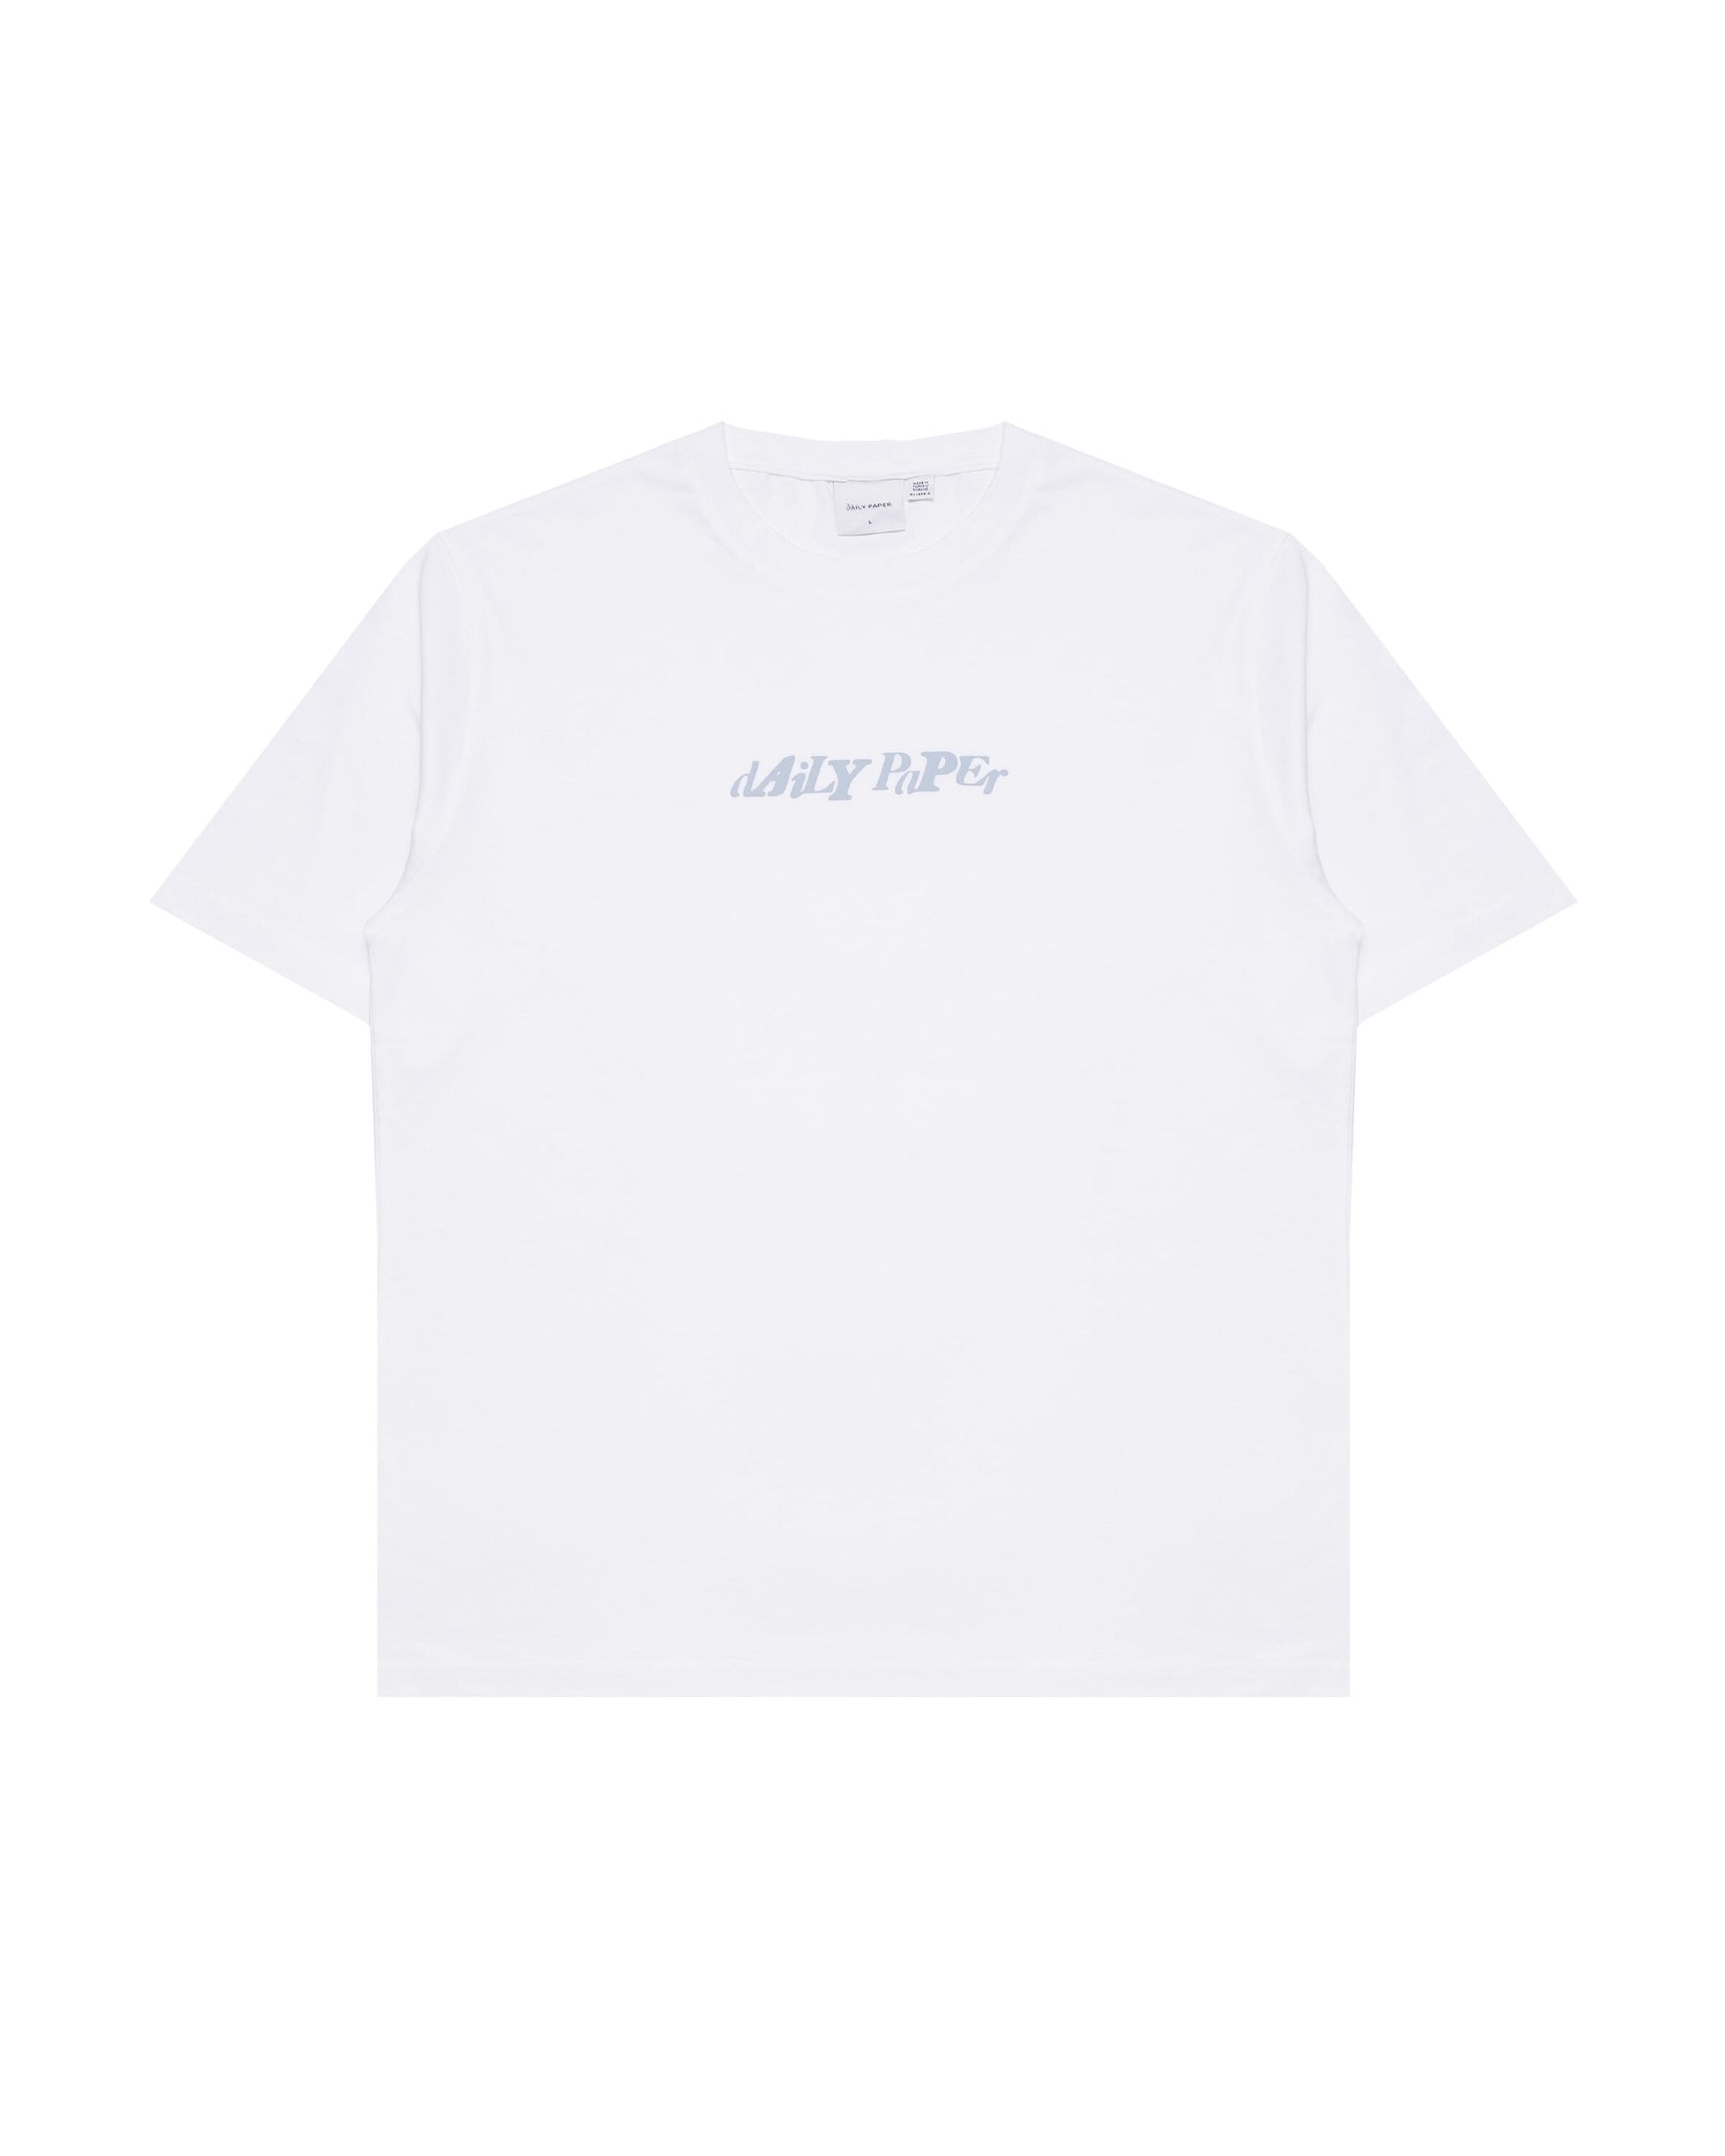 Daily Paper unified type t-shirt